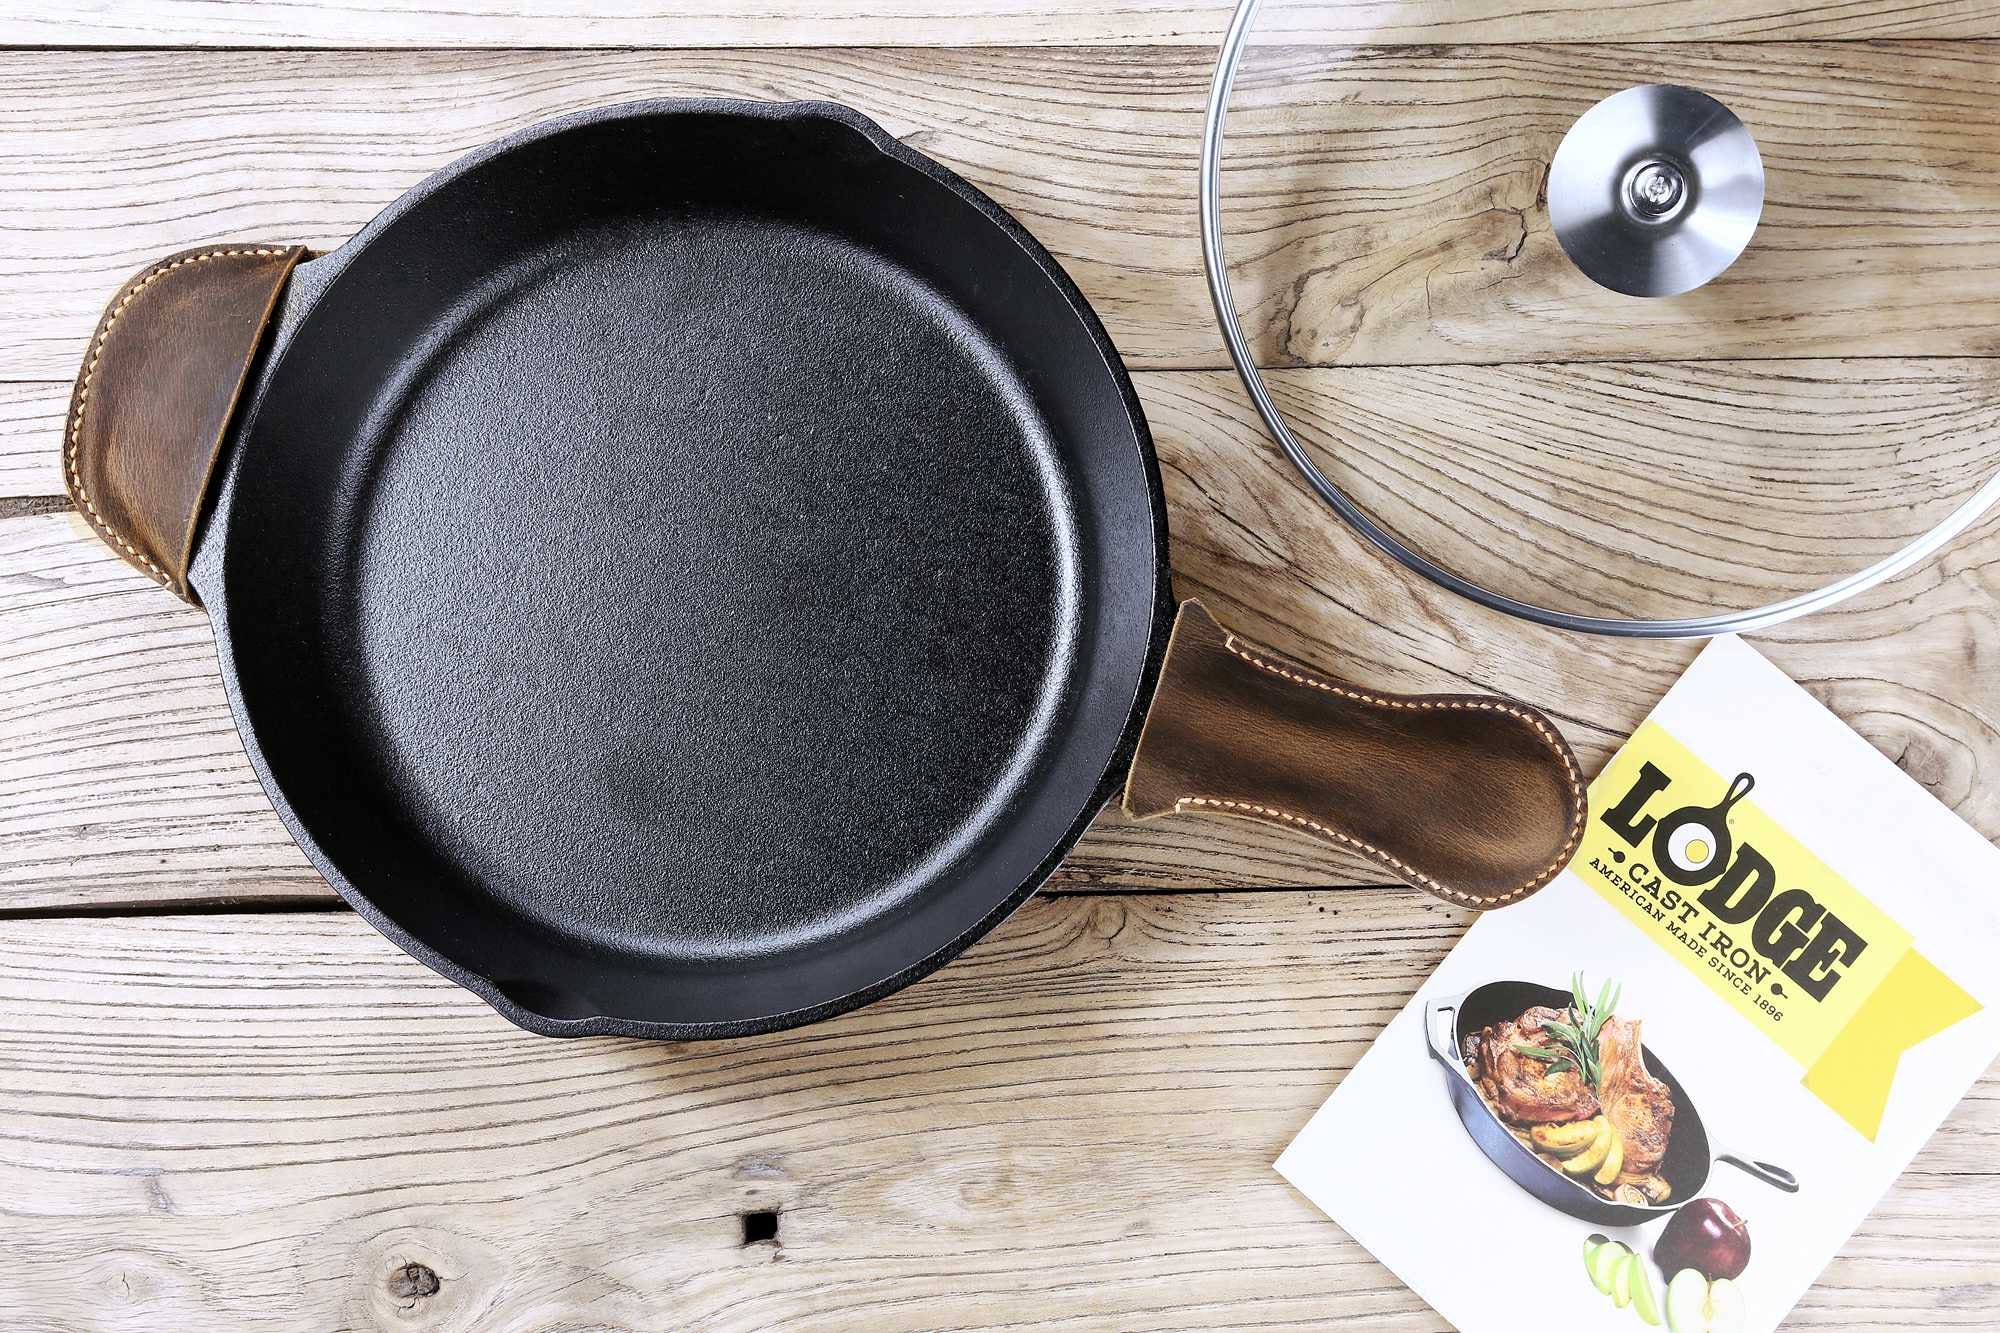 Pan Handle Covers - Cast Iron Skillet Cover Pot & Sleeve Insulated Mitt  Kitchen Gadget - Yahoo Shopping